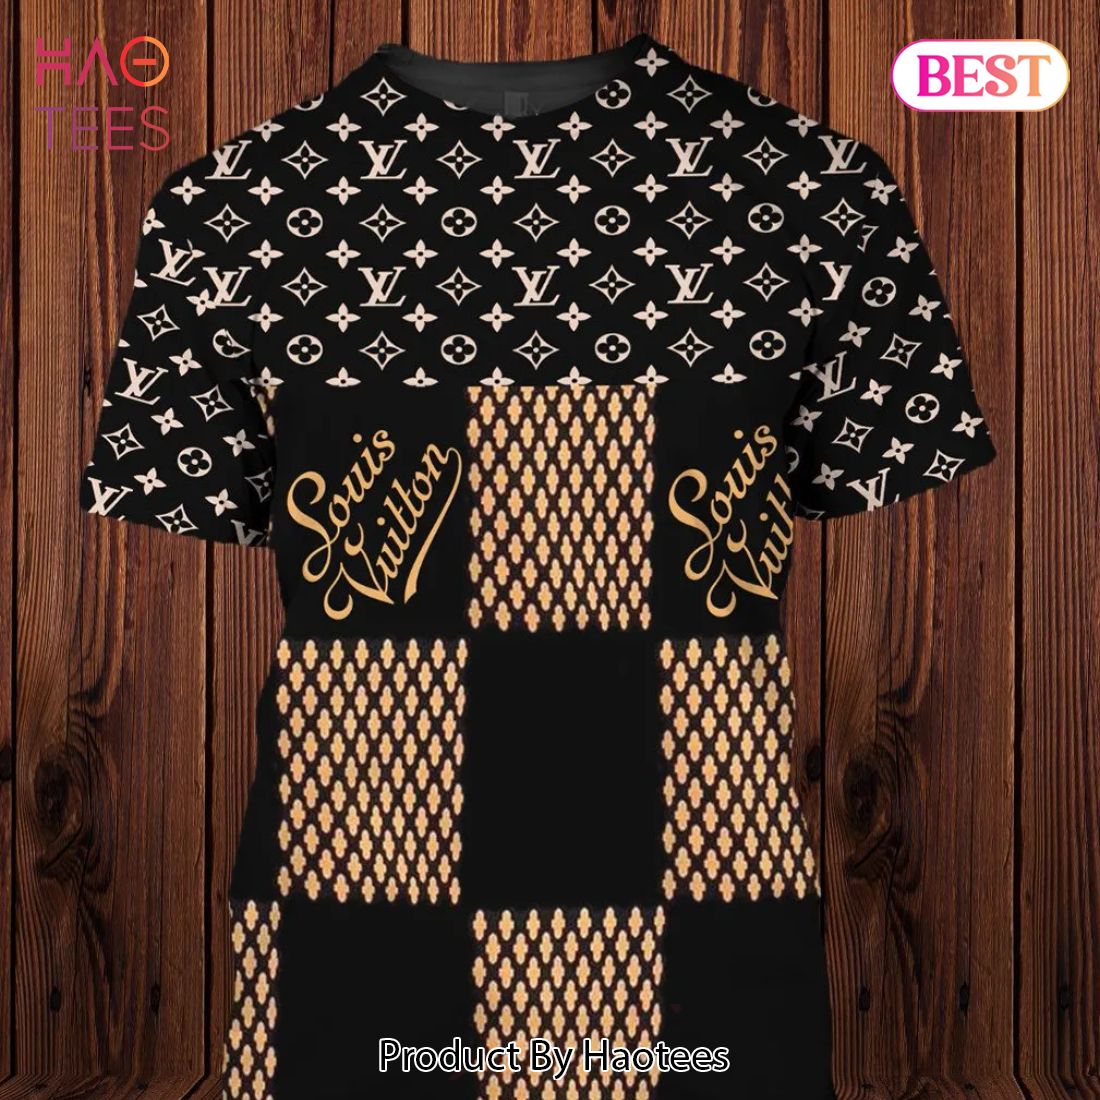 [NEW FASHION] Louis Vuitton New Luxury Brand T-Shirt Outfit For Men Women